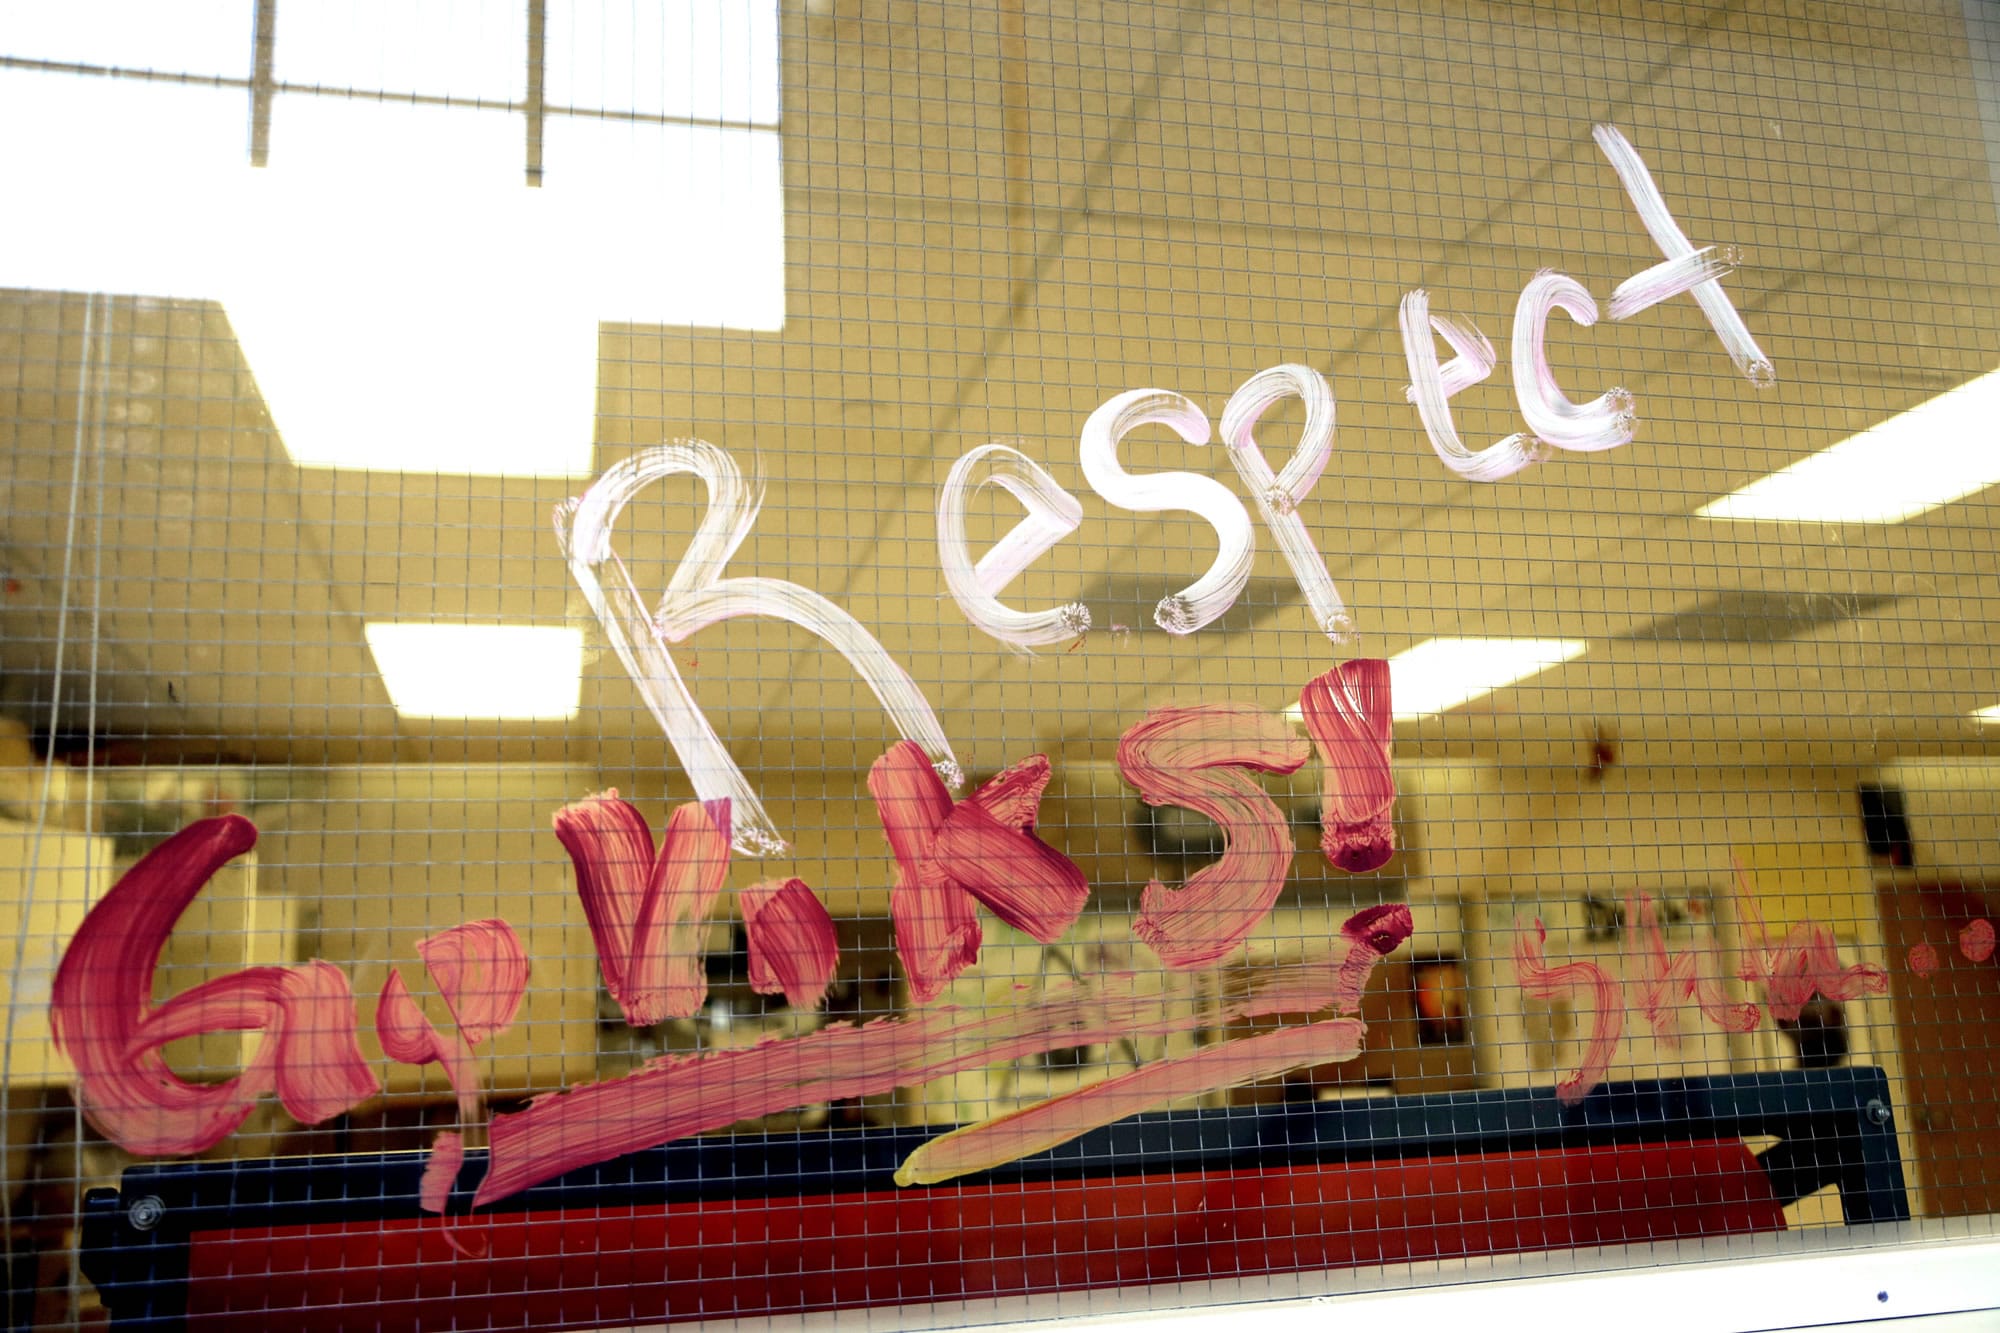 A hand-painted message is written on a classroom window at Forest Grove High School in Forest Grove, Ore., May 4, 2017. Experts who have treated young sexual offenders stress the value of early intervention, and research cites the importance of a culture that encourages students to report incidents without fear of retaliation and with the expectation that adults will do the right thing.